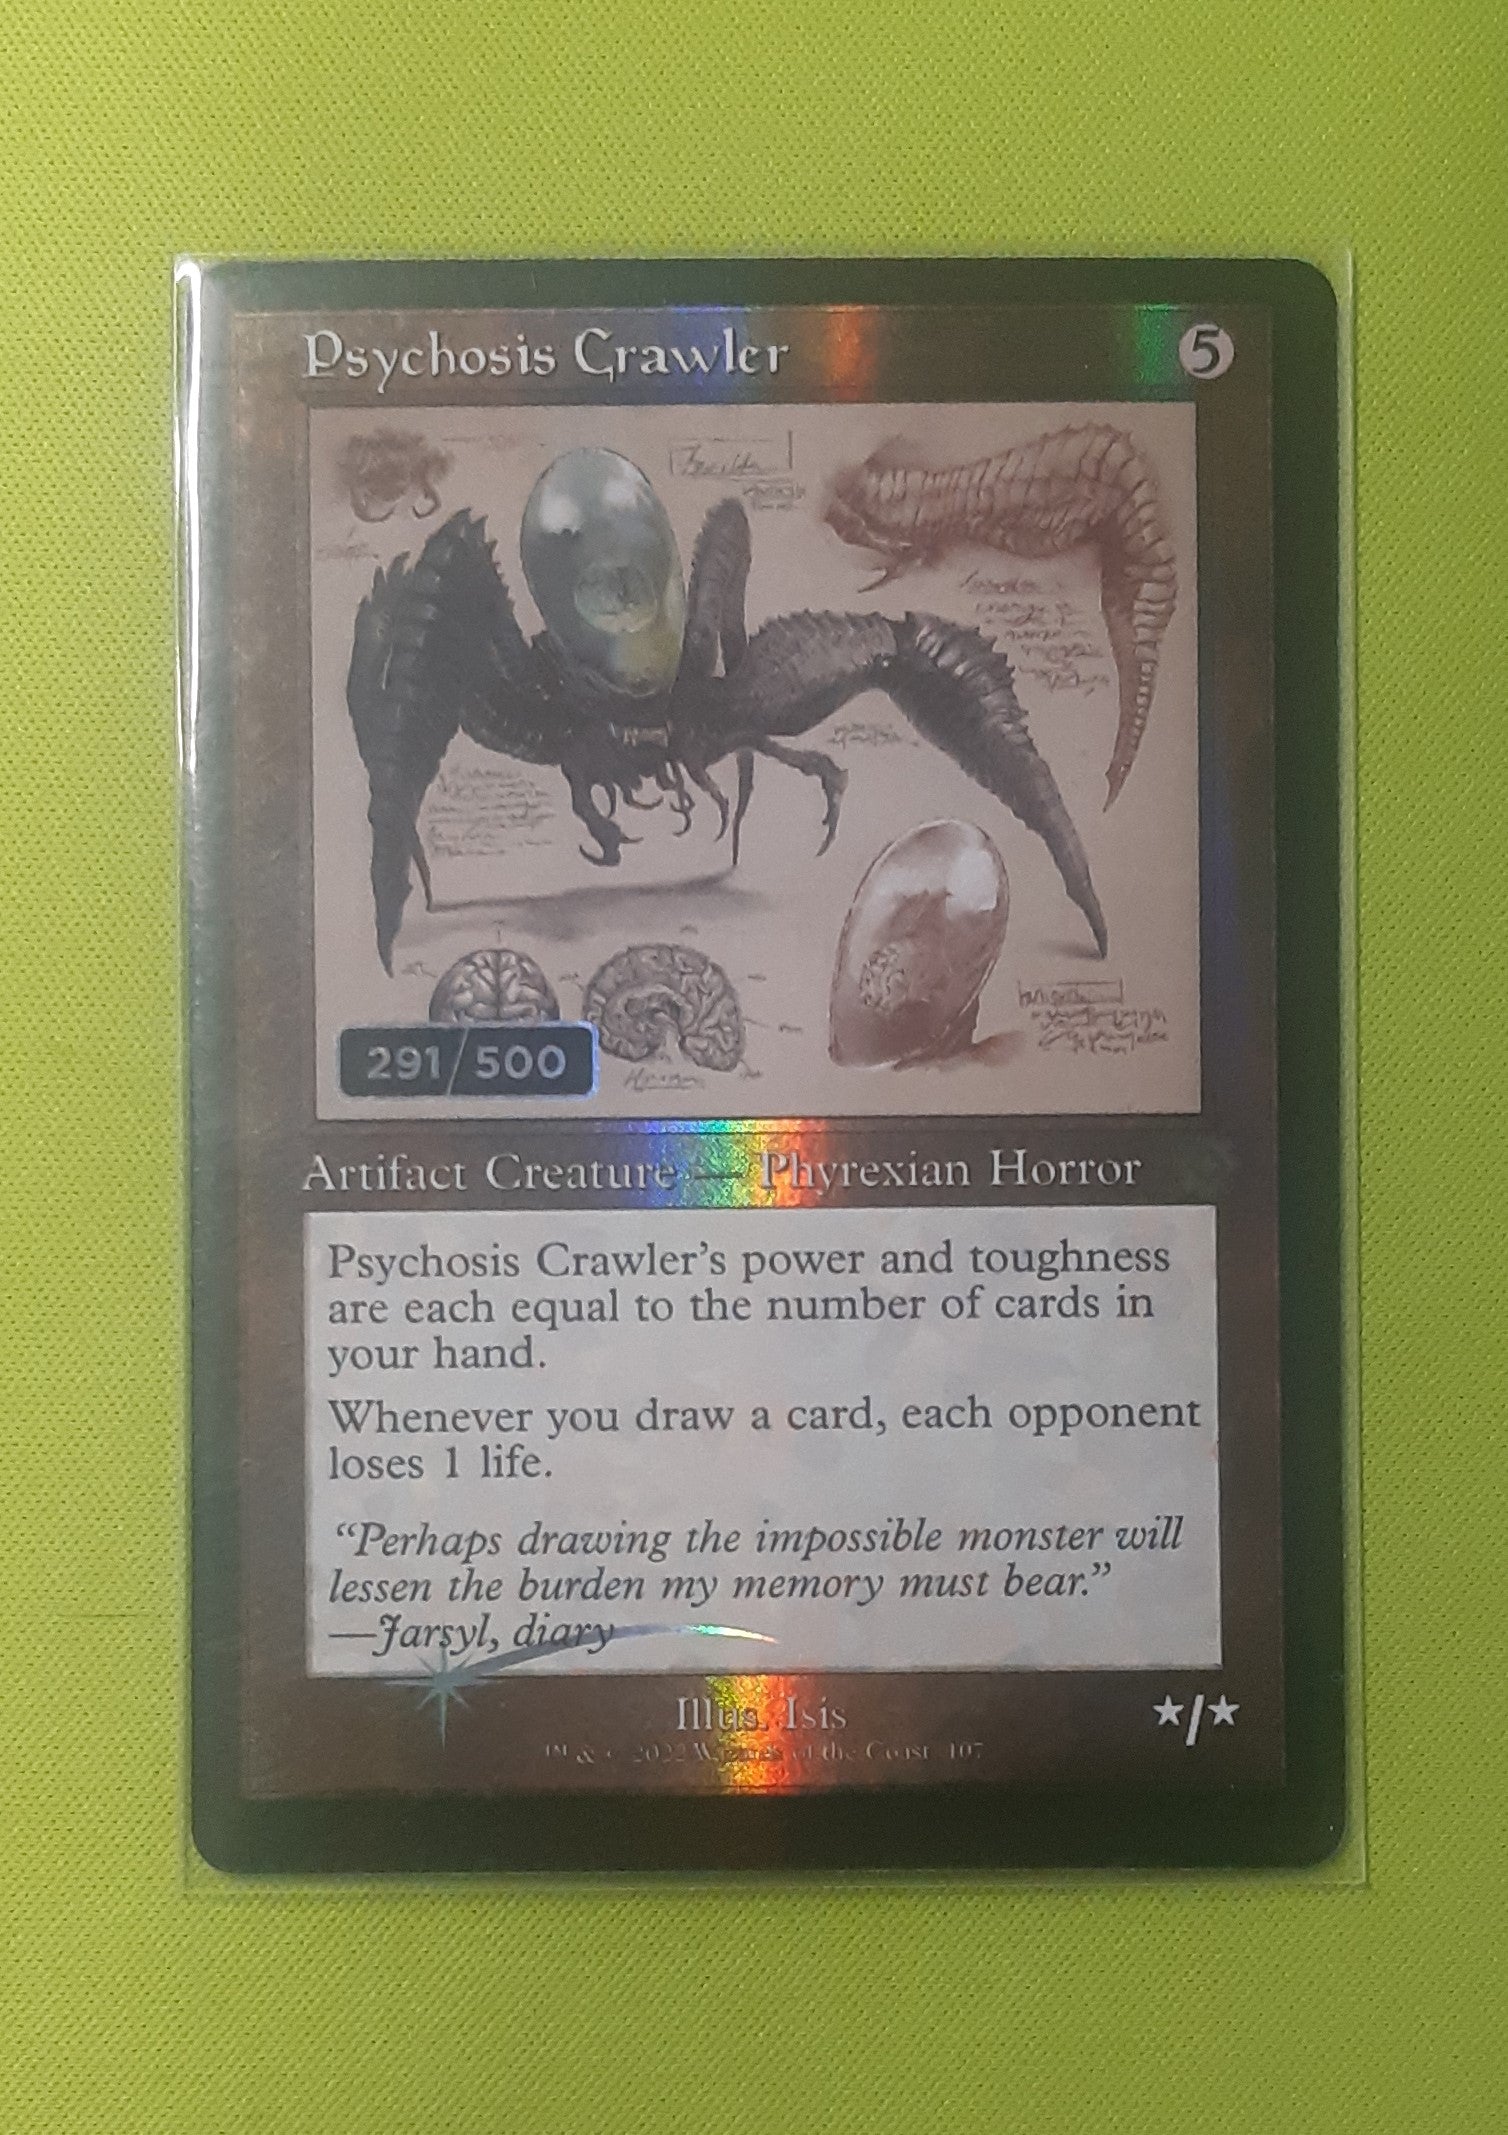 Psychosis Crawler (Retro Schematic) (Serial Numbered 291/500) [The Brothers' War Retro Artifacts] | All Aboard Games